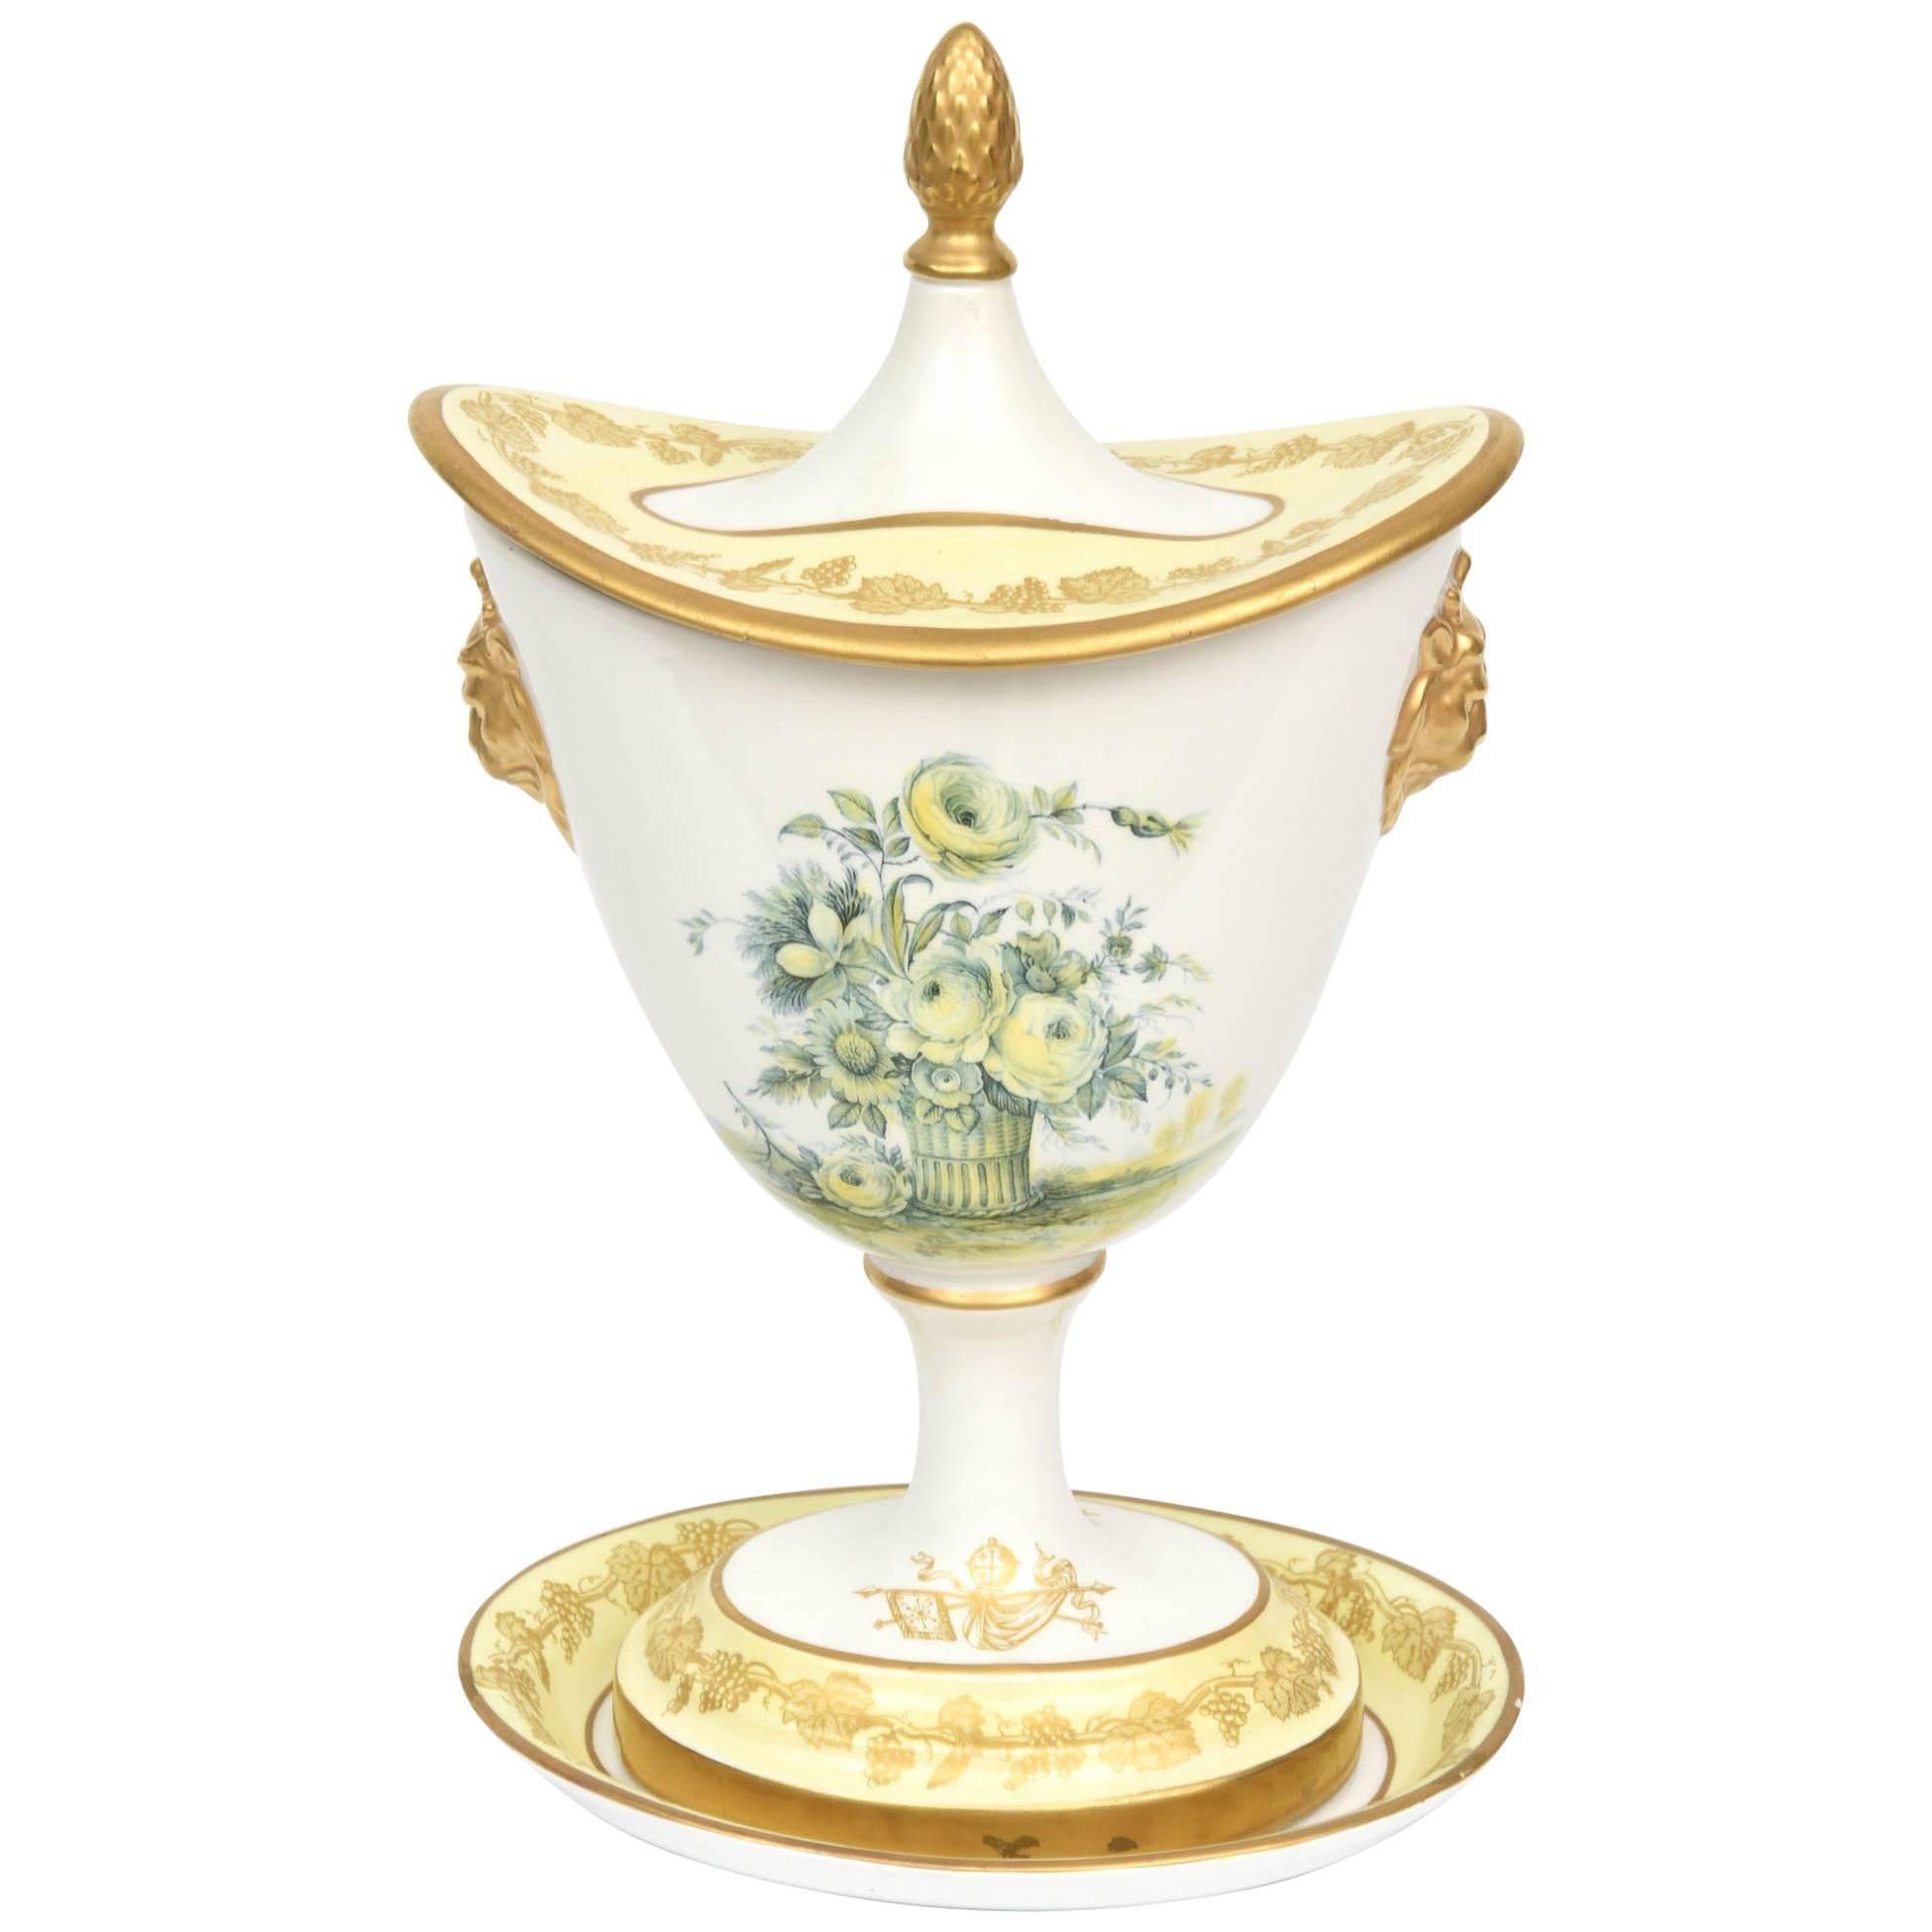 Yellow Covered Vase and Stand, Vintage Mottahedeh, Rose Floral Motif